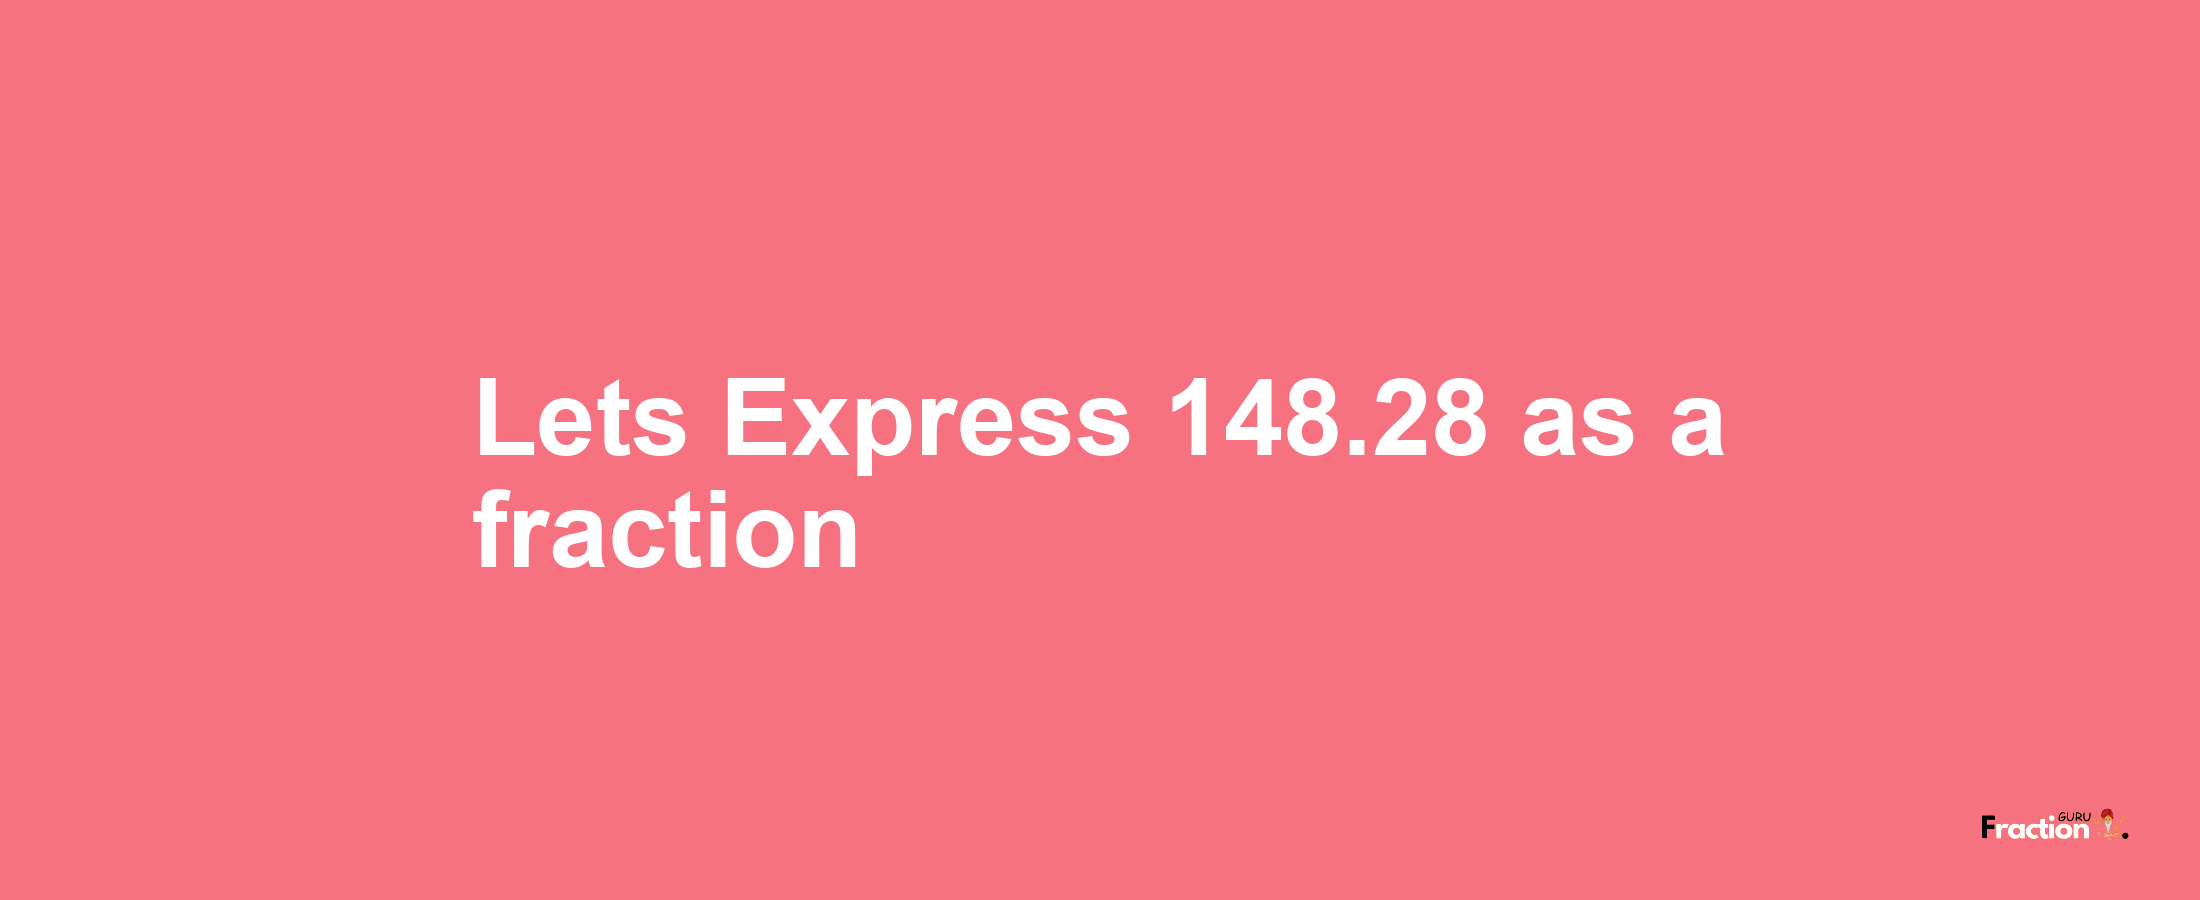 Lets Express 148.28 as afraction